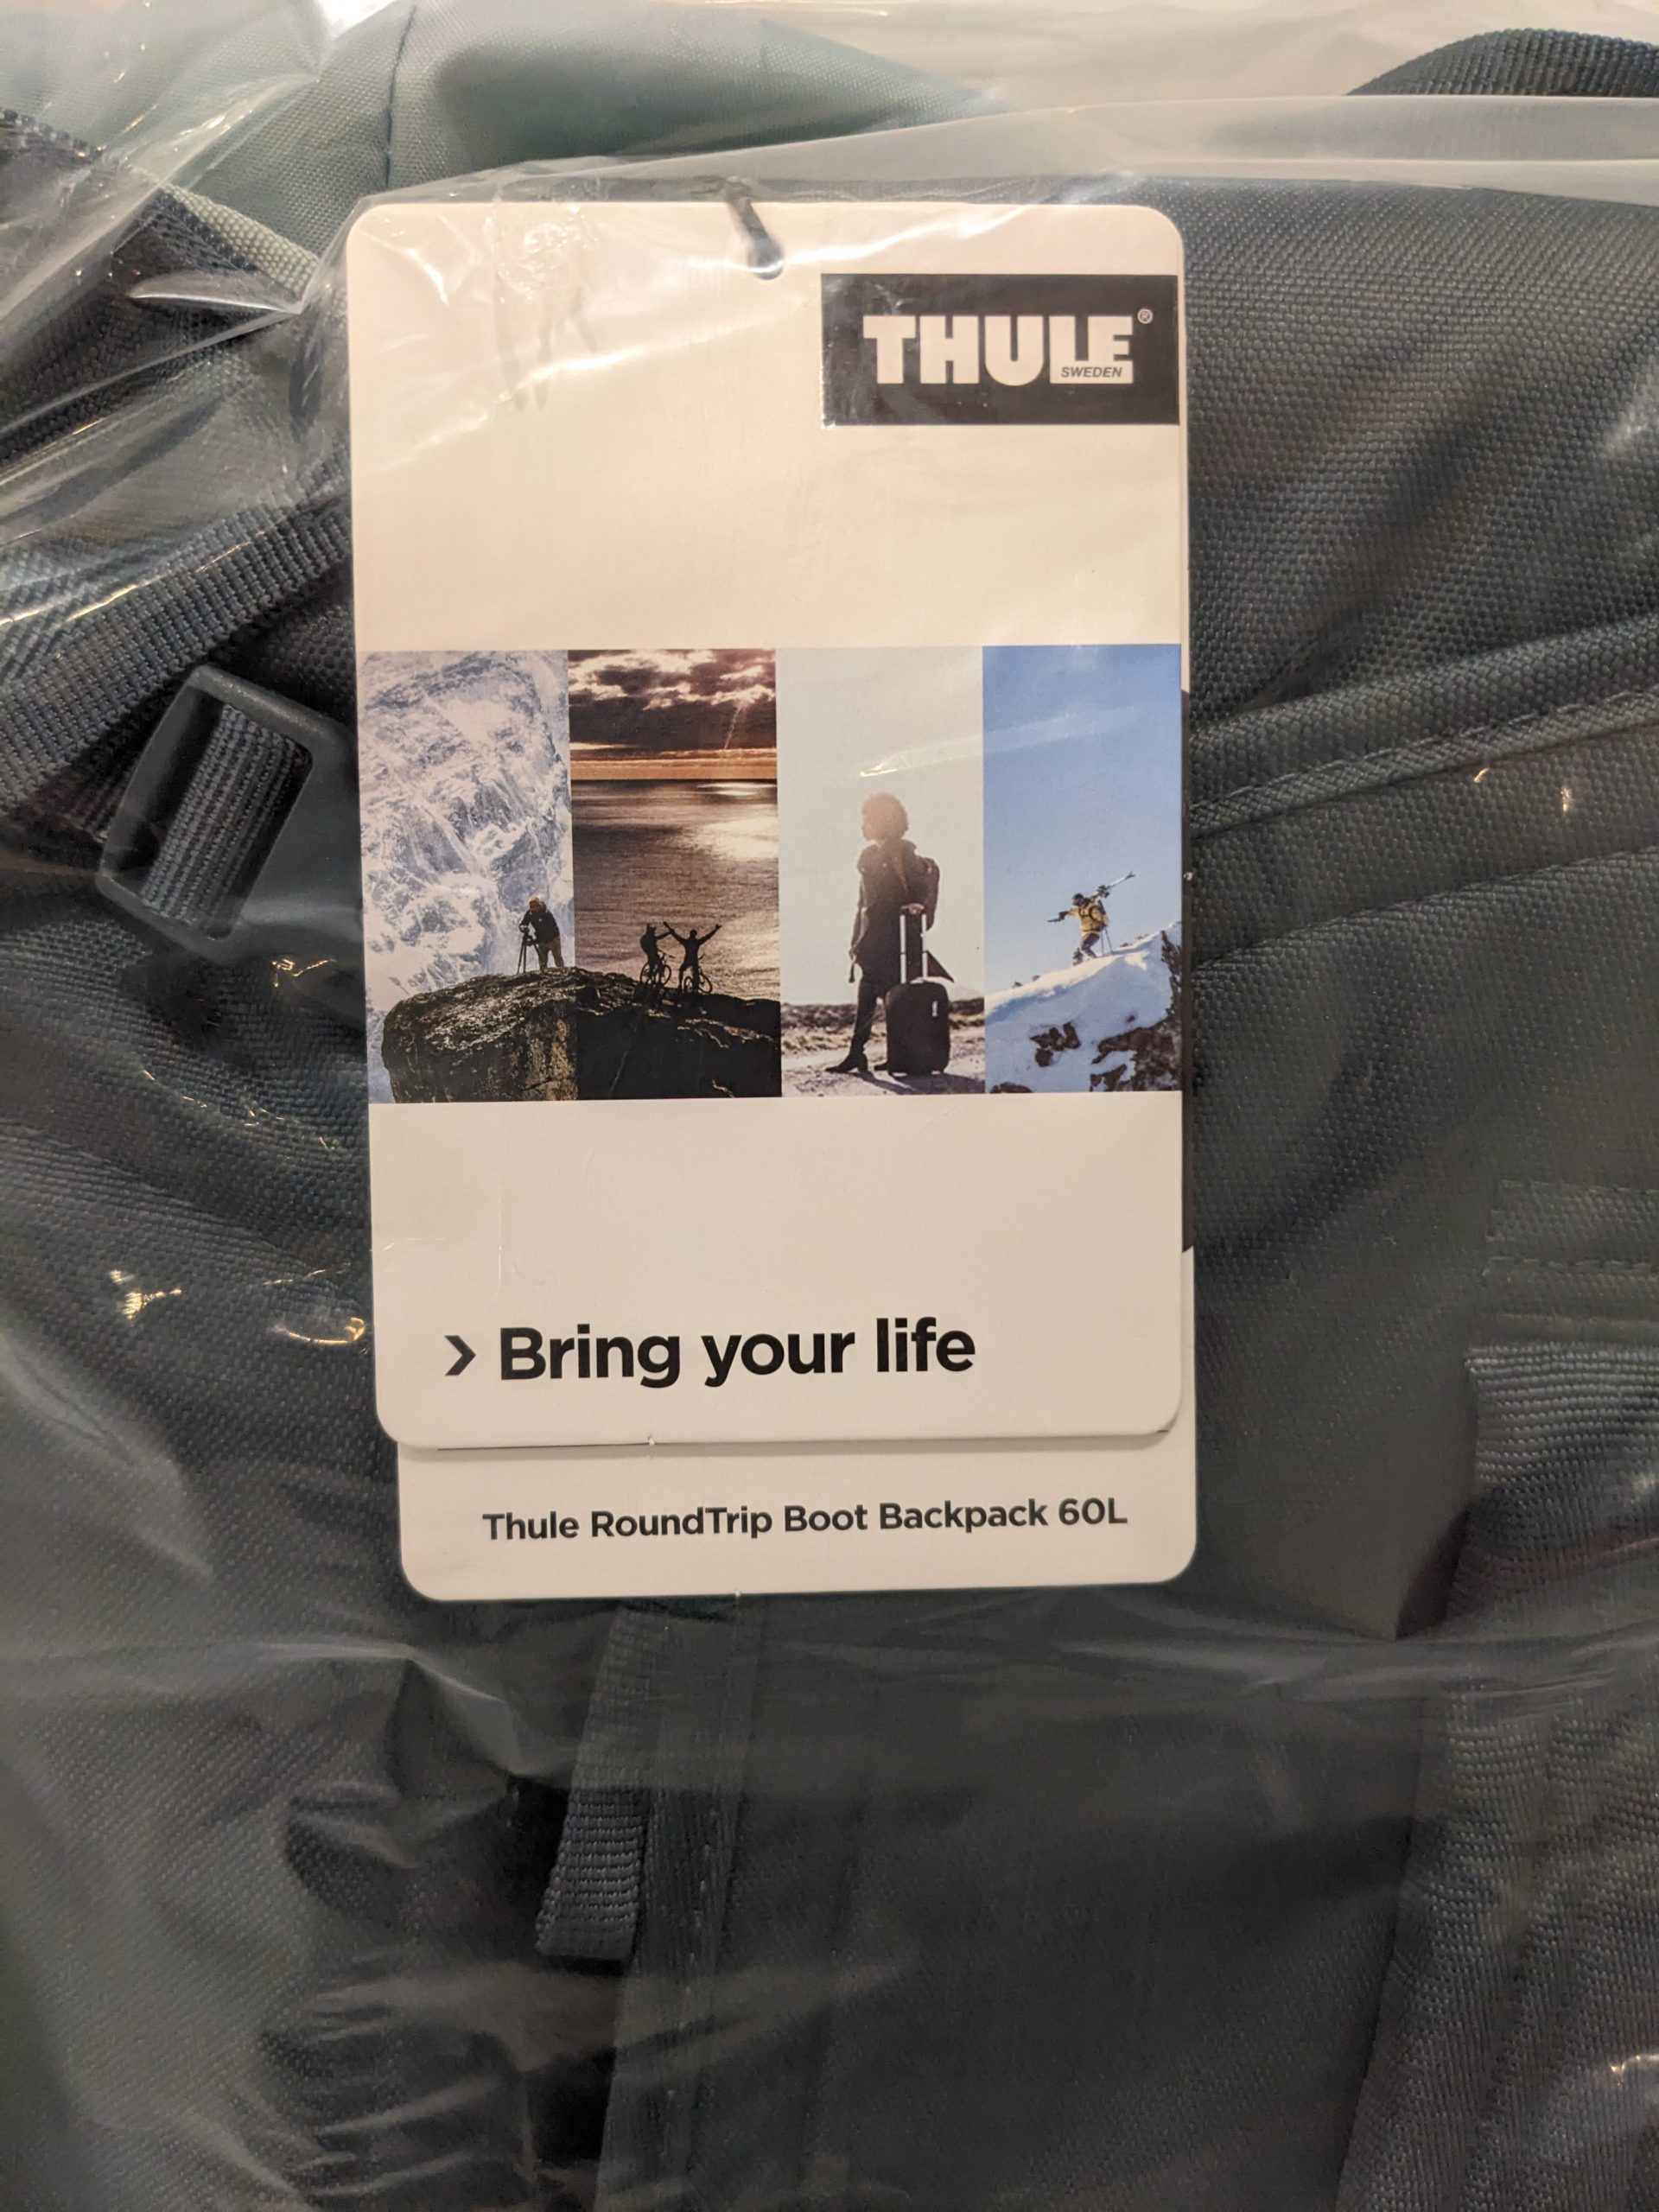 Thule Roundtrip Bootbackpack 60L